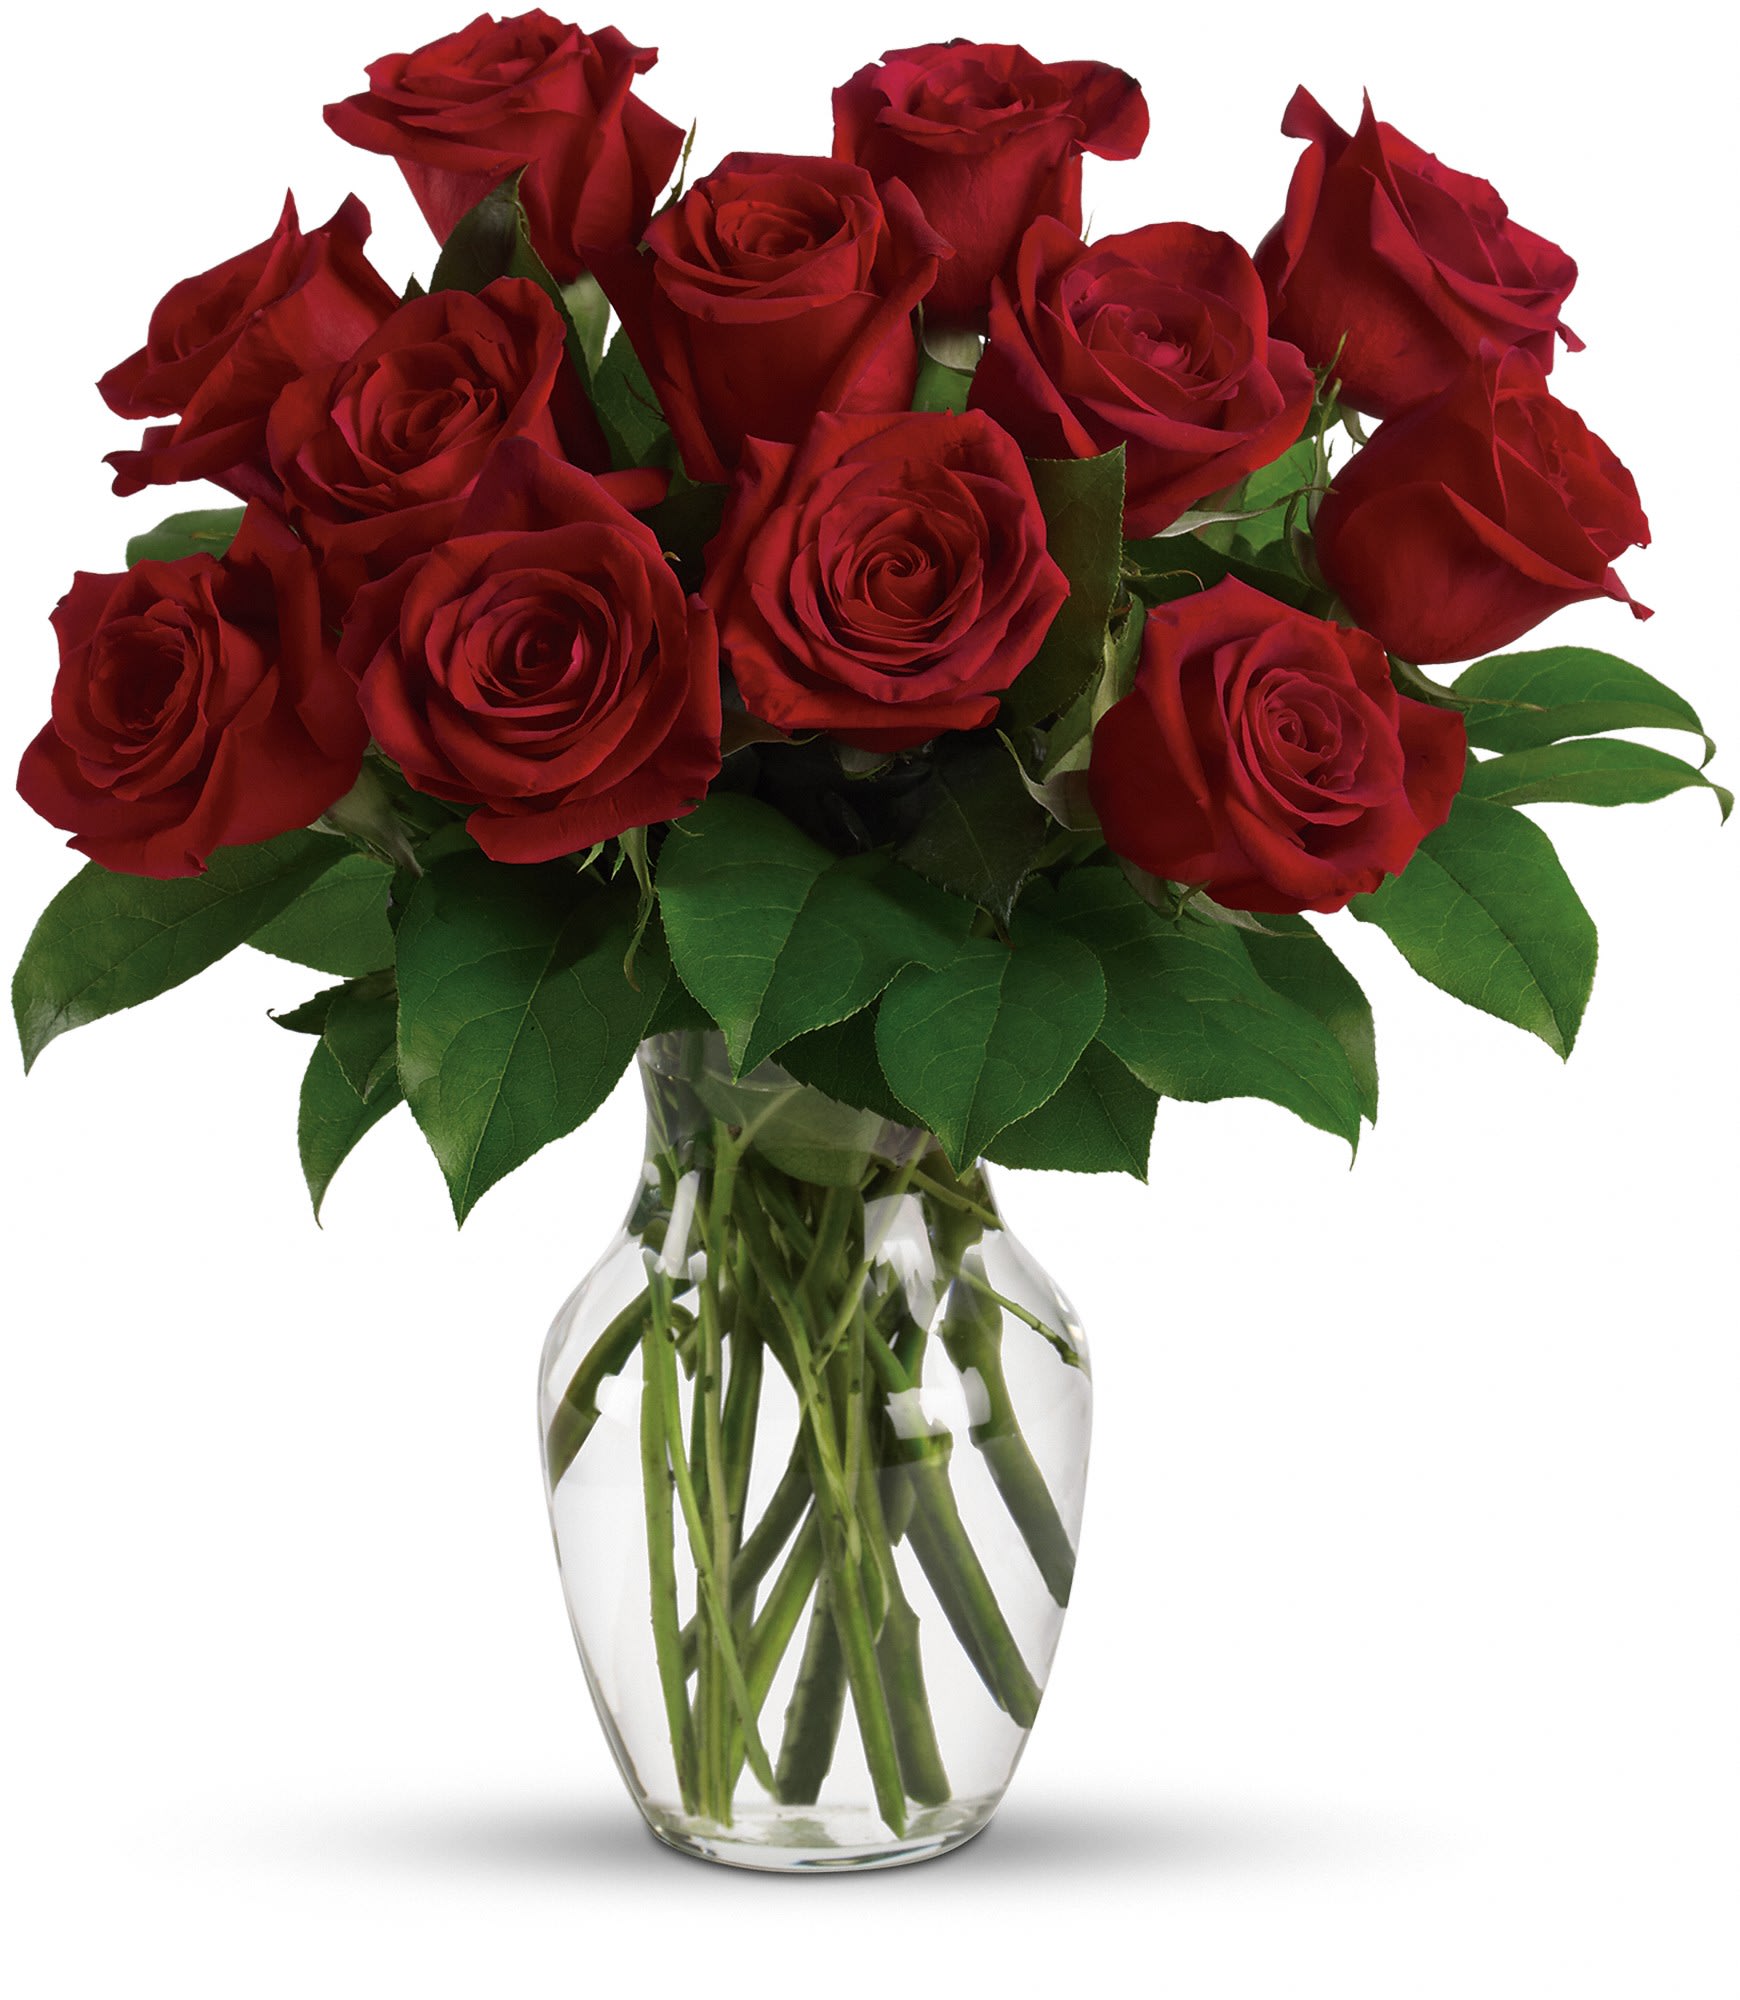 Enduring Passion - 12, 18 or 24  Red Roses - Double her pleasure, double her fun with two dozen gorgeous red roses arranged in a sparkling clear glass vase. This truly breathtaking gift will make her fall in love with you all over again. Which will double your pleasure and fun, too.